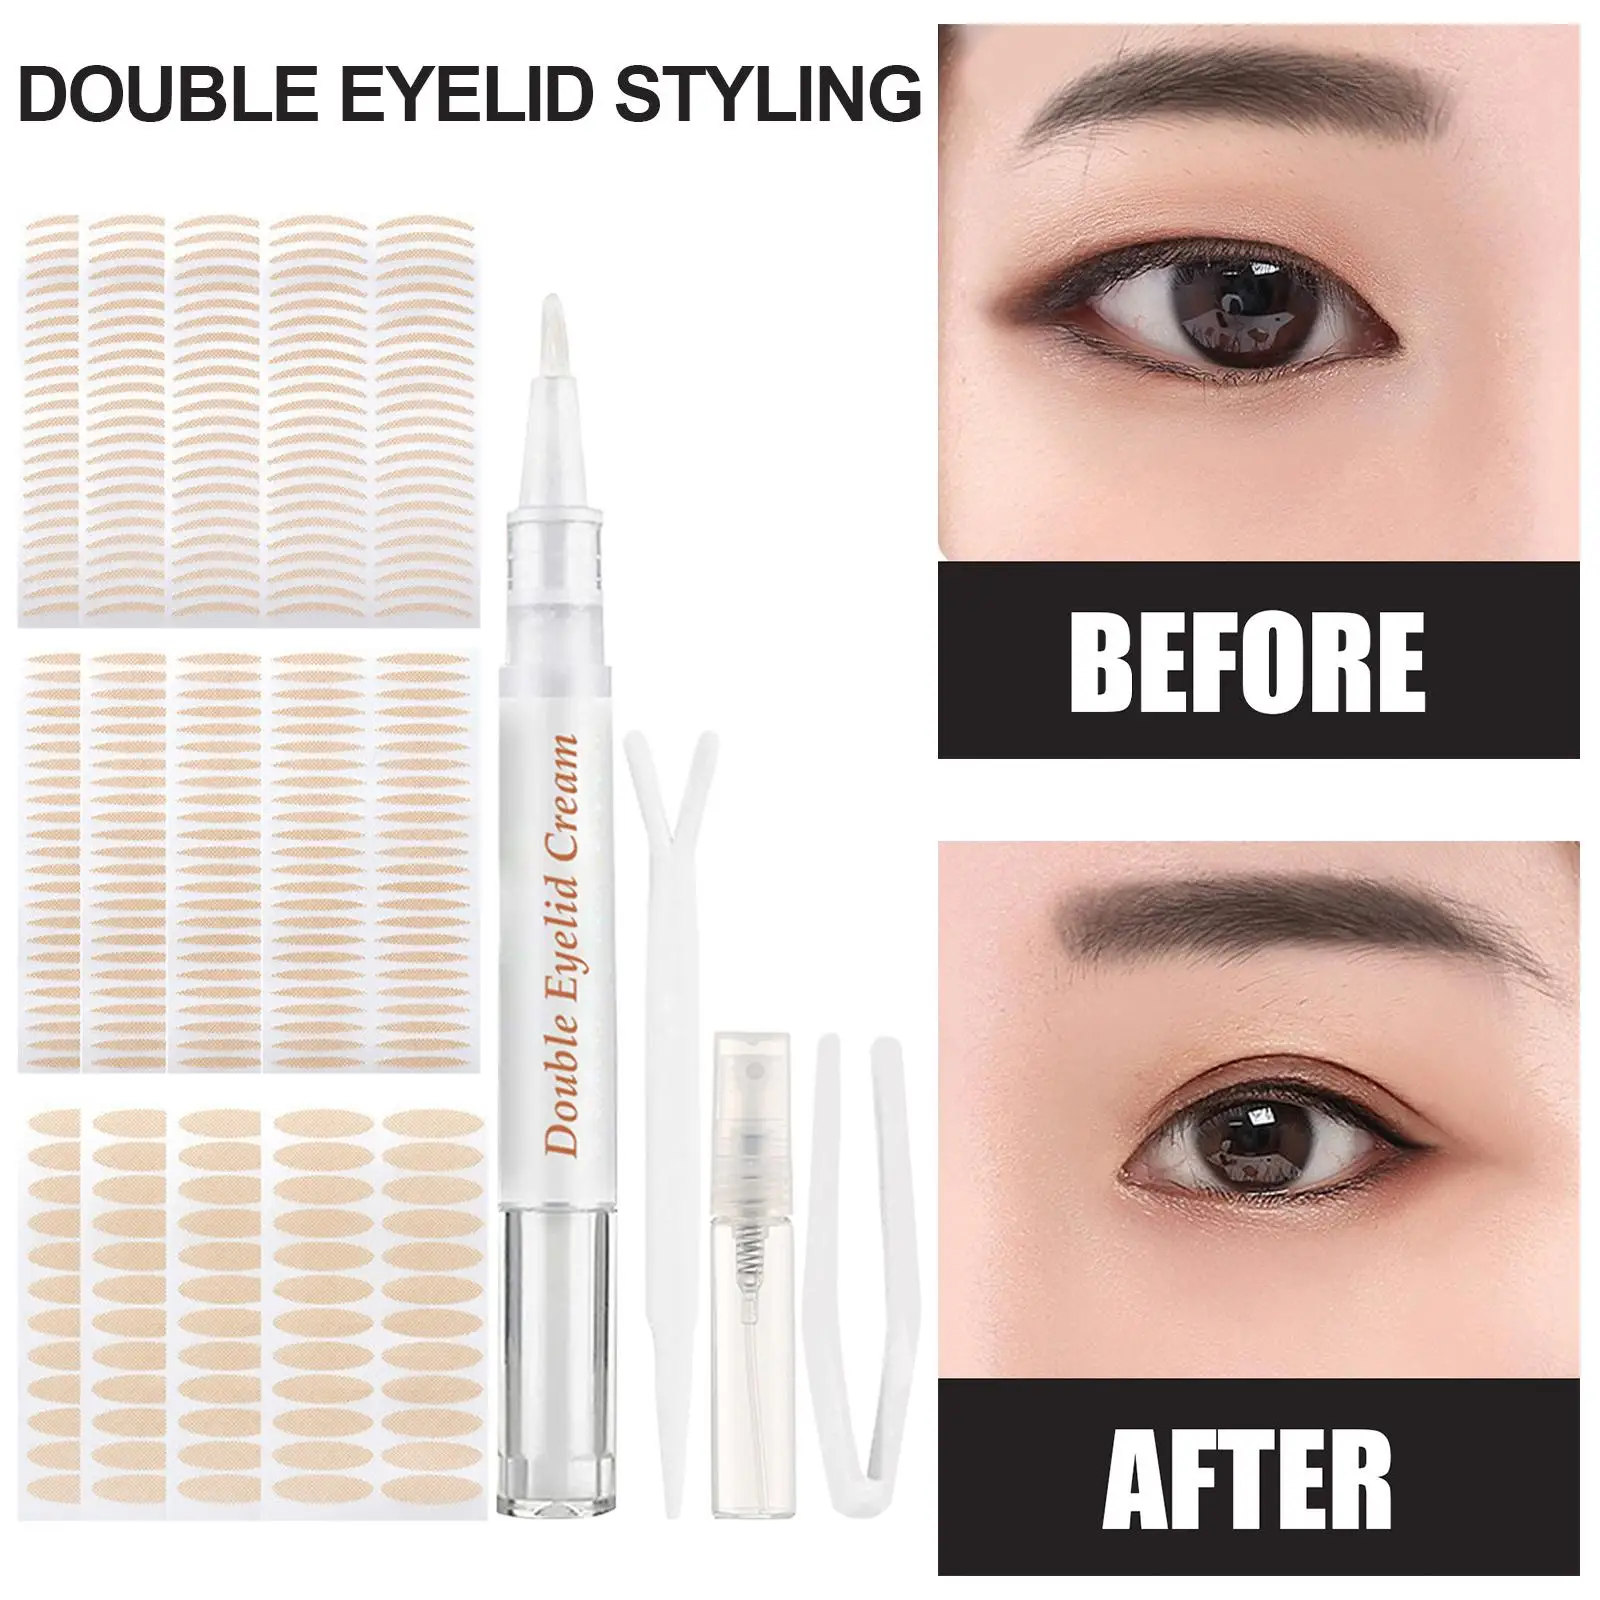 Eyelid Tape Sweatproof with Eyelid Cream Fork Instant Double Eyelid Tape for Heavy Hooded Uneven Monolids Makeup Droopy Lids